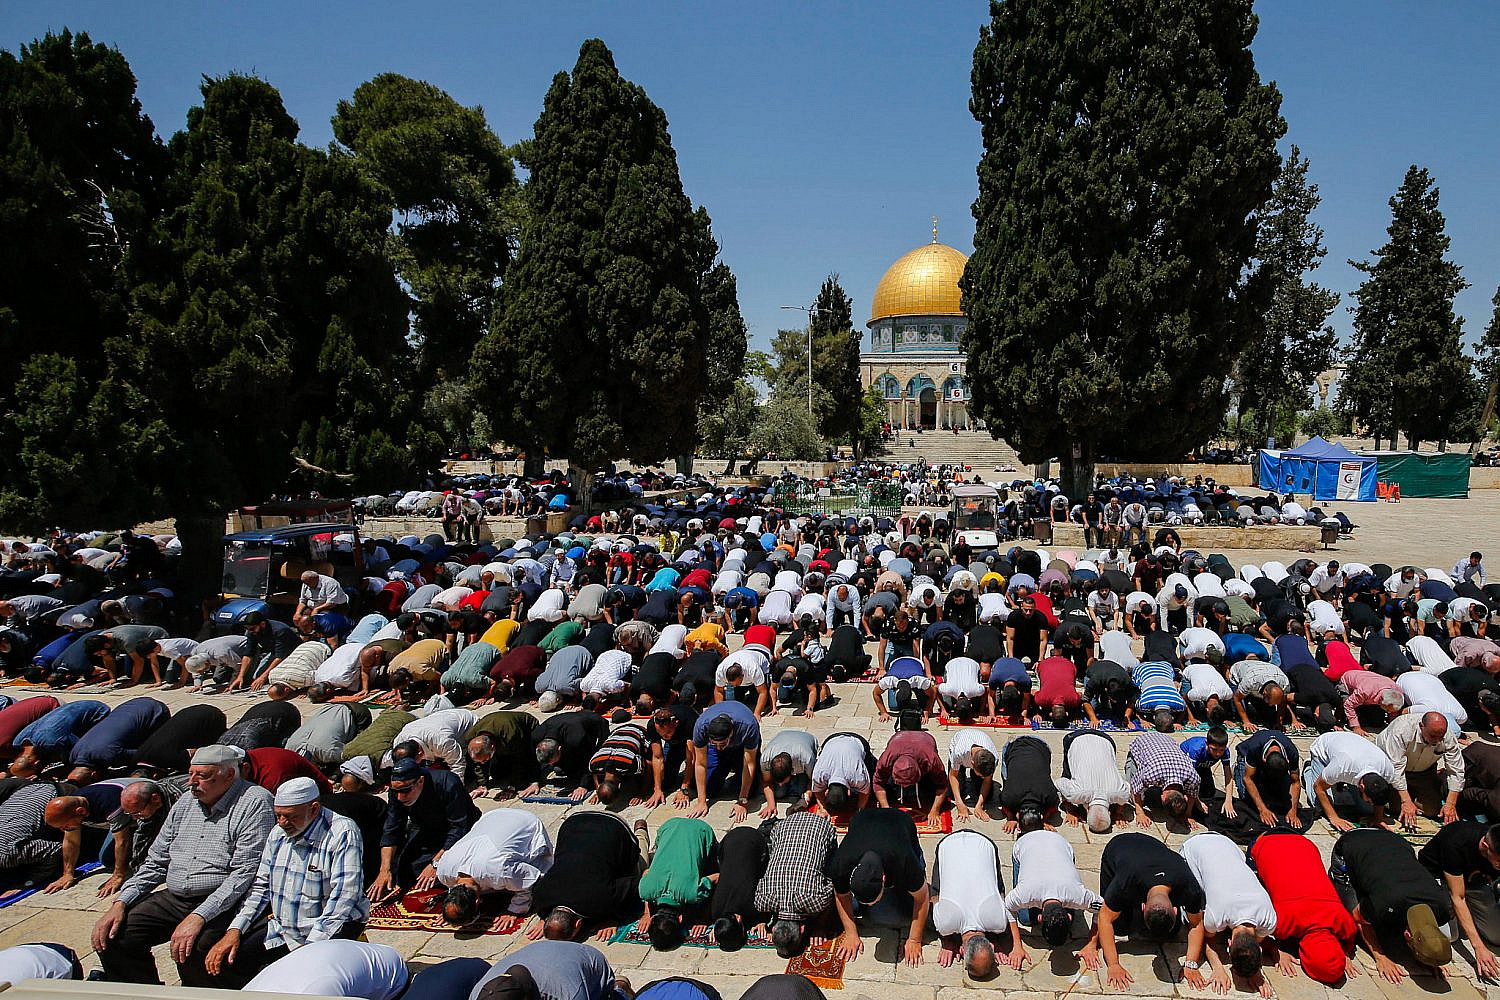 Muslims attend Friday prayers on the second Friday of the holy month of Ramadan, at Al Aqsa mosque, in Jerusalem's Old City, April 23, 2021. (Jamal Awad/Flash90)